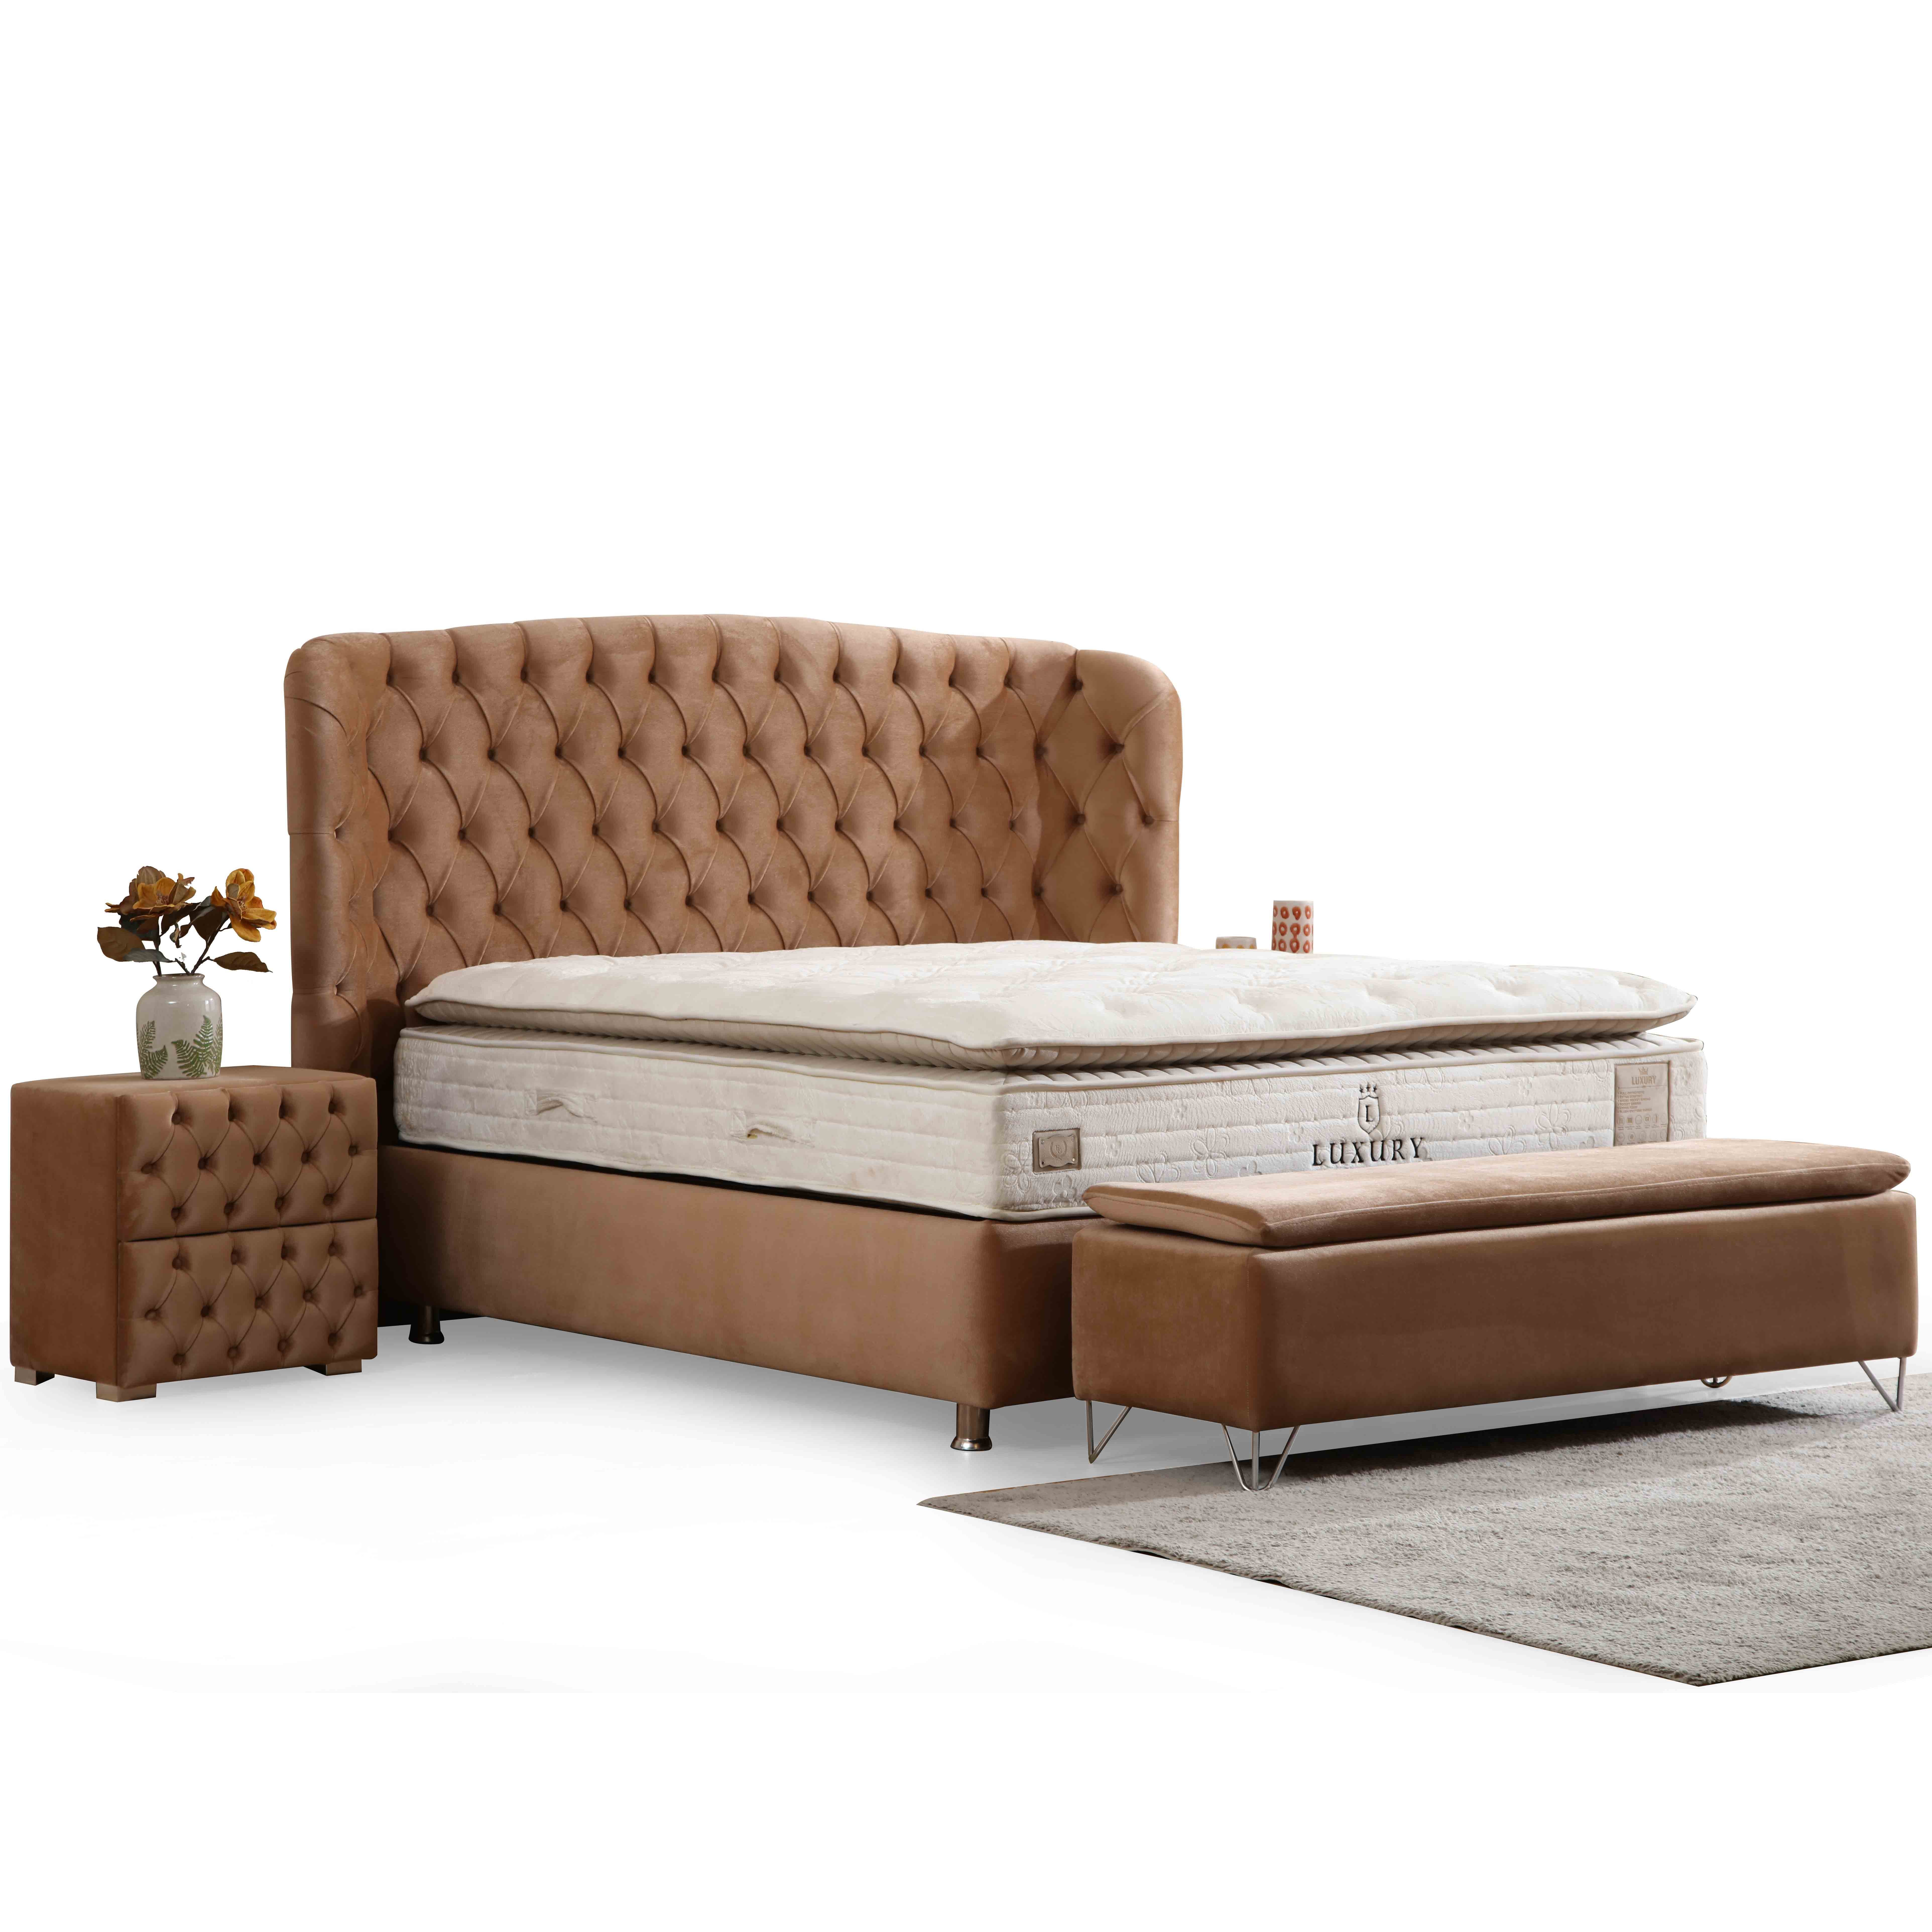 Riva Bedroom (Bed With Storage 180x200cm)